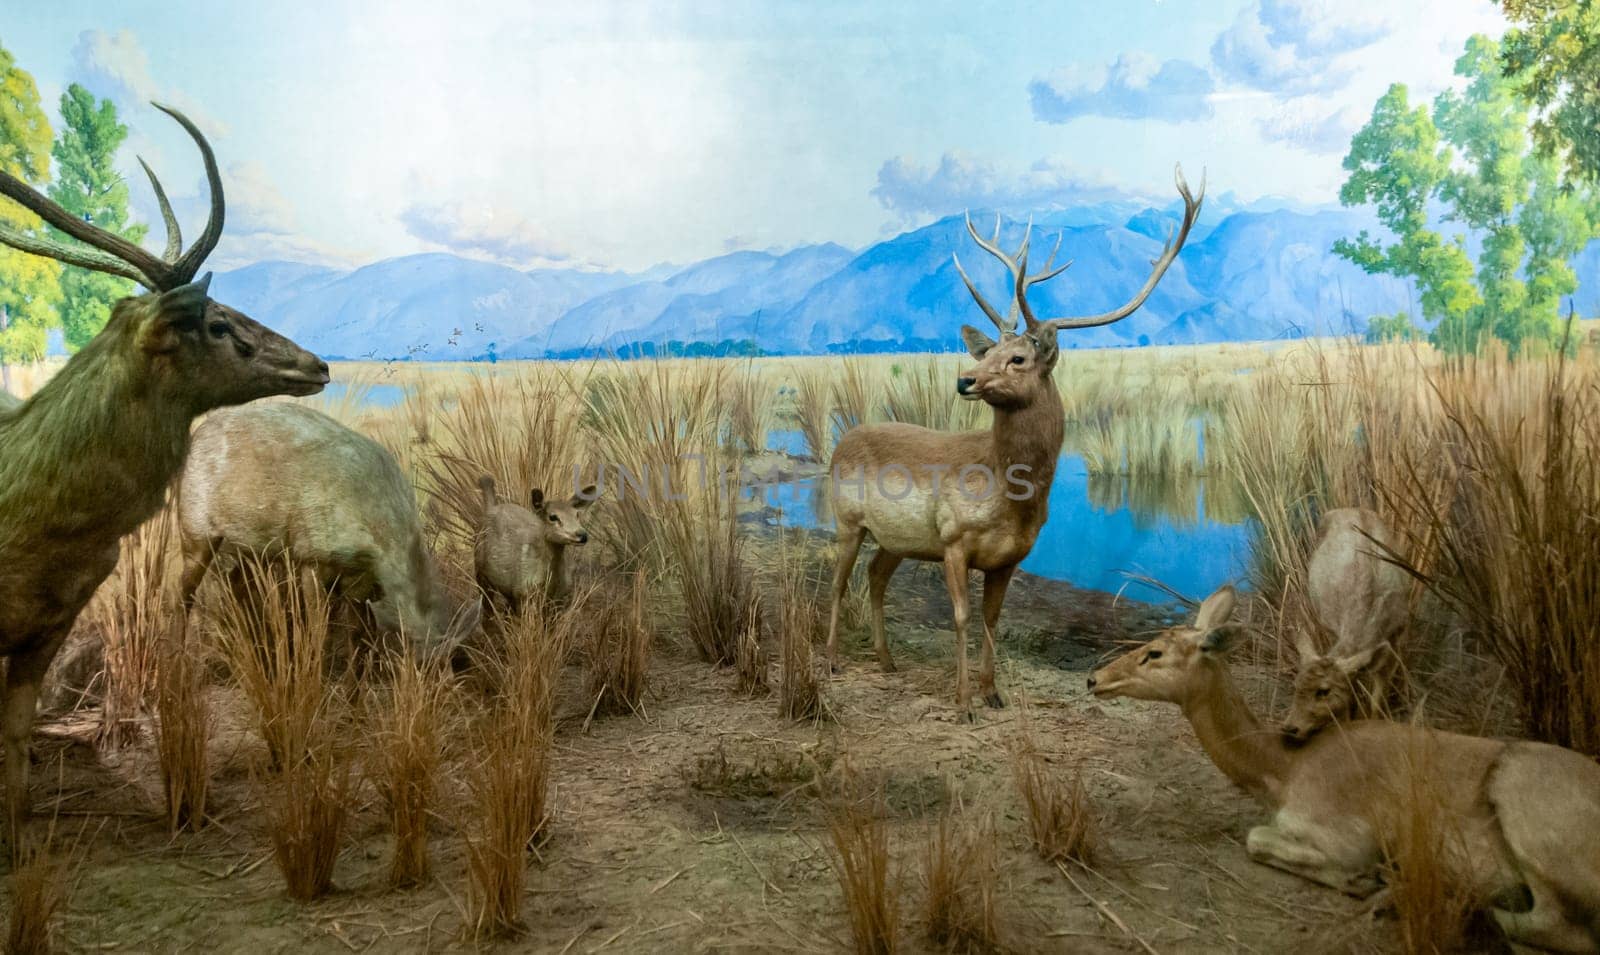 NEW YORK, USA - DECEMBER 05, 2011: Stuffed deer with antlers on display at the Museum of National History, USA by Hydrobiolog